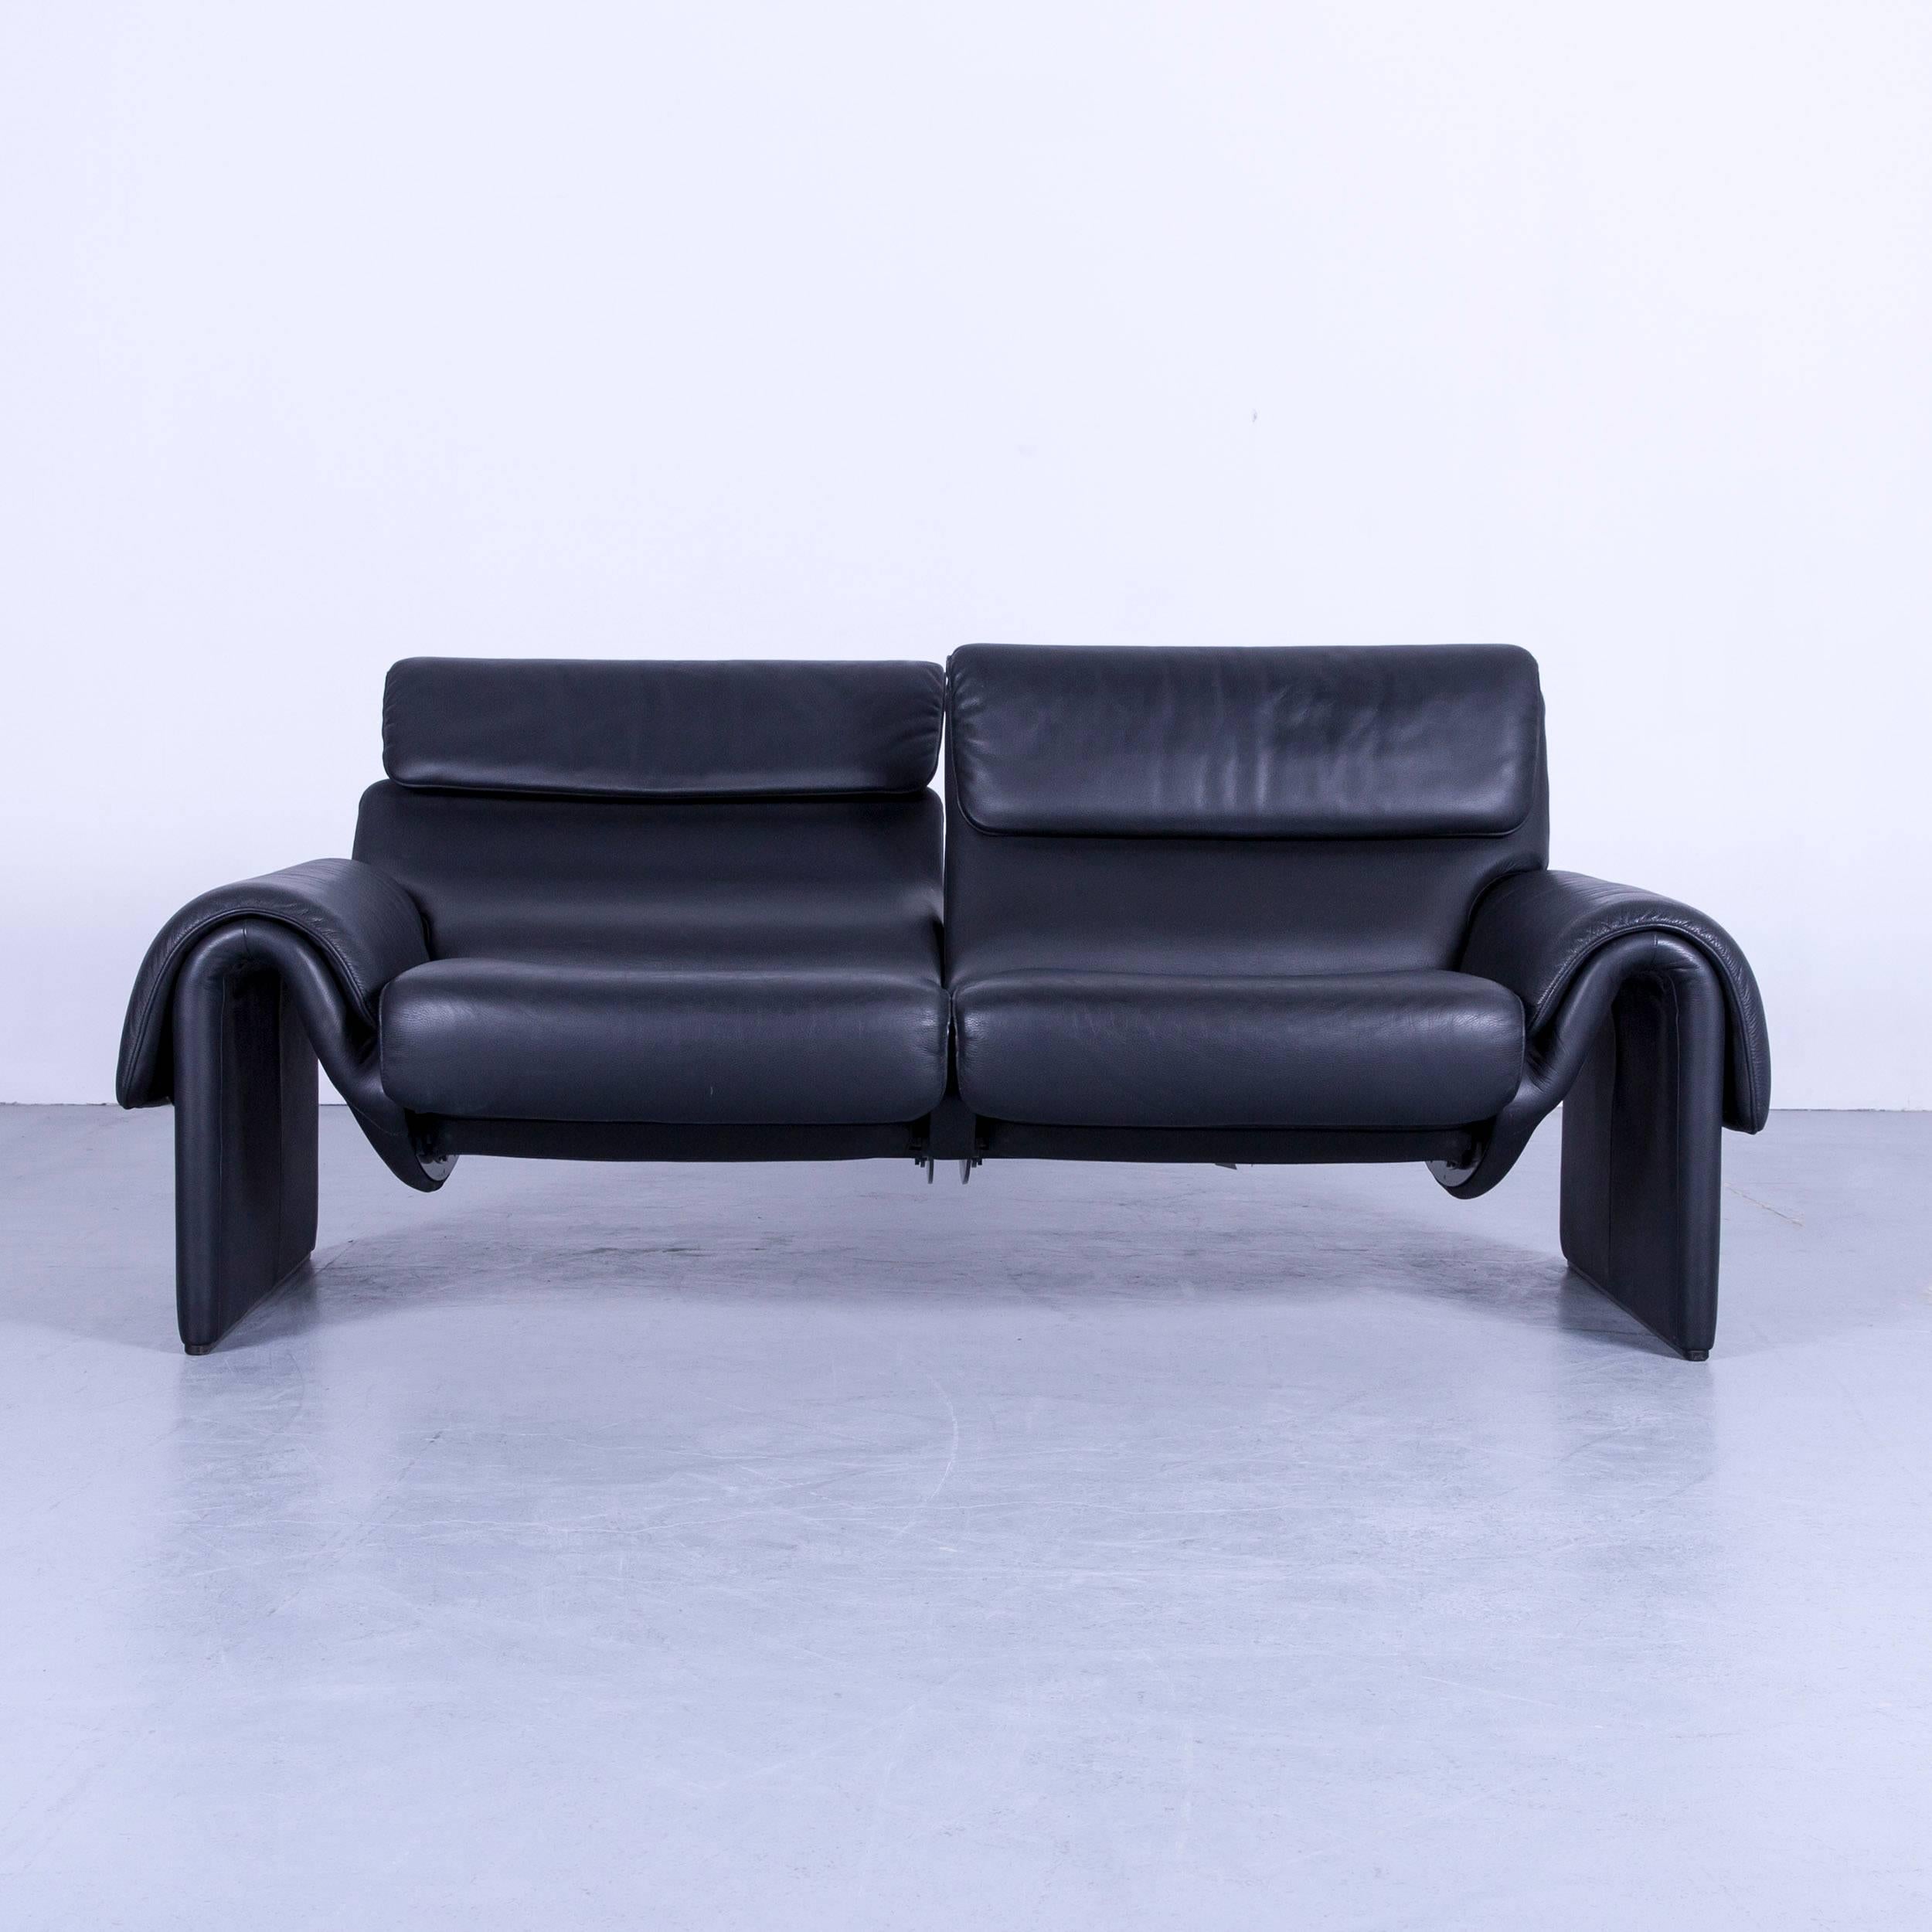 De Sede DS 2000 designer sofa black leather relax function couch Switzerland, with convenient functions, made for pure comfort and flexibility.